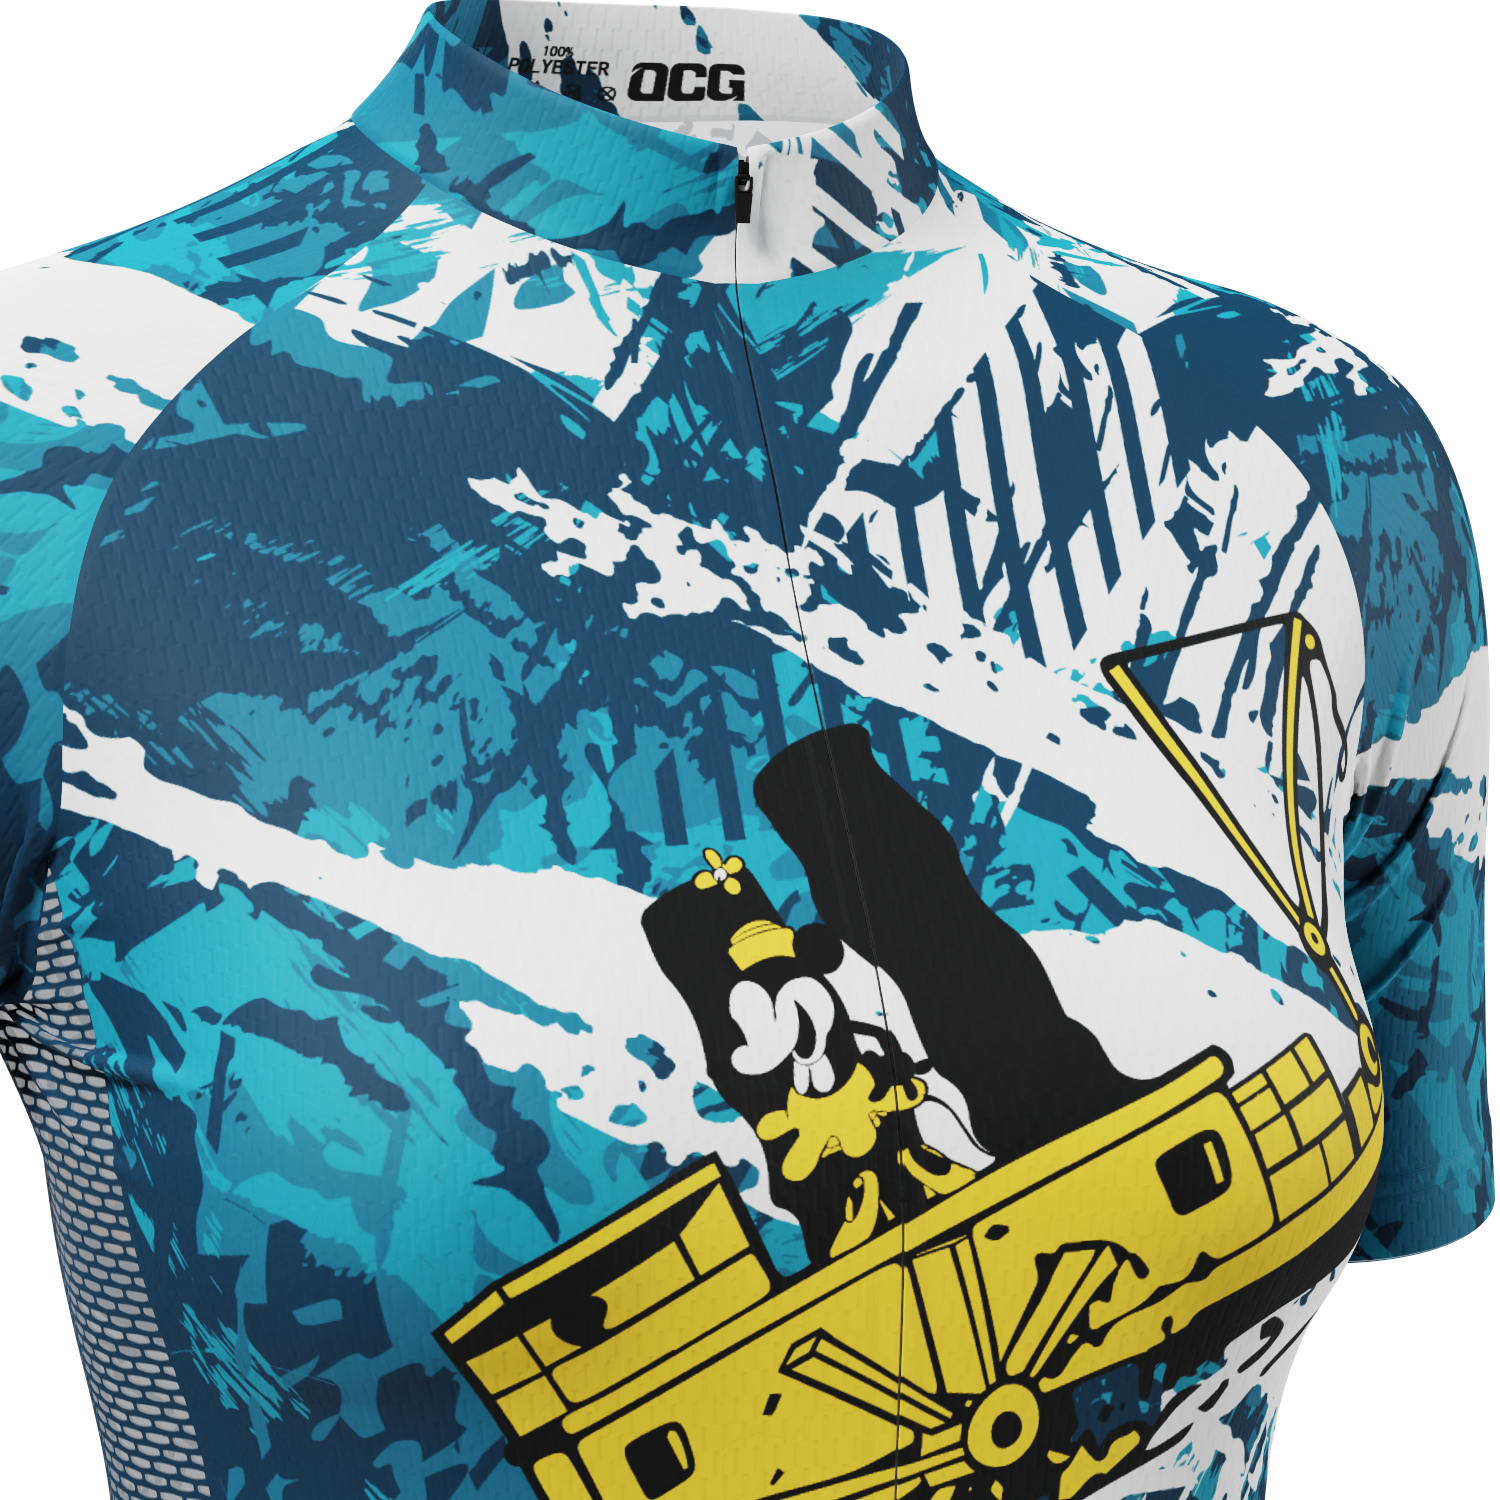 Women's Steamboat Willie in The Sea Short Sleeve Cycling Jersey